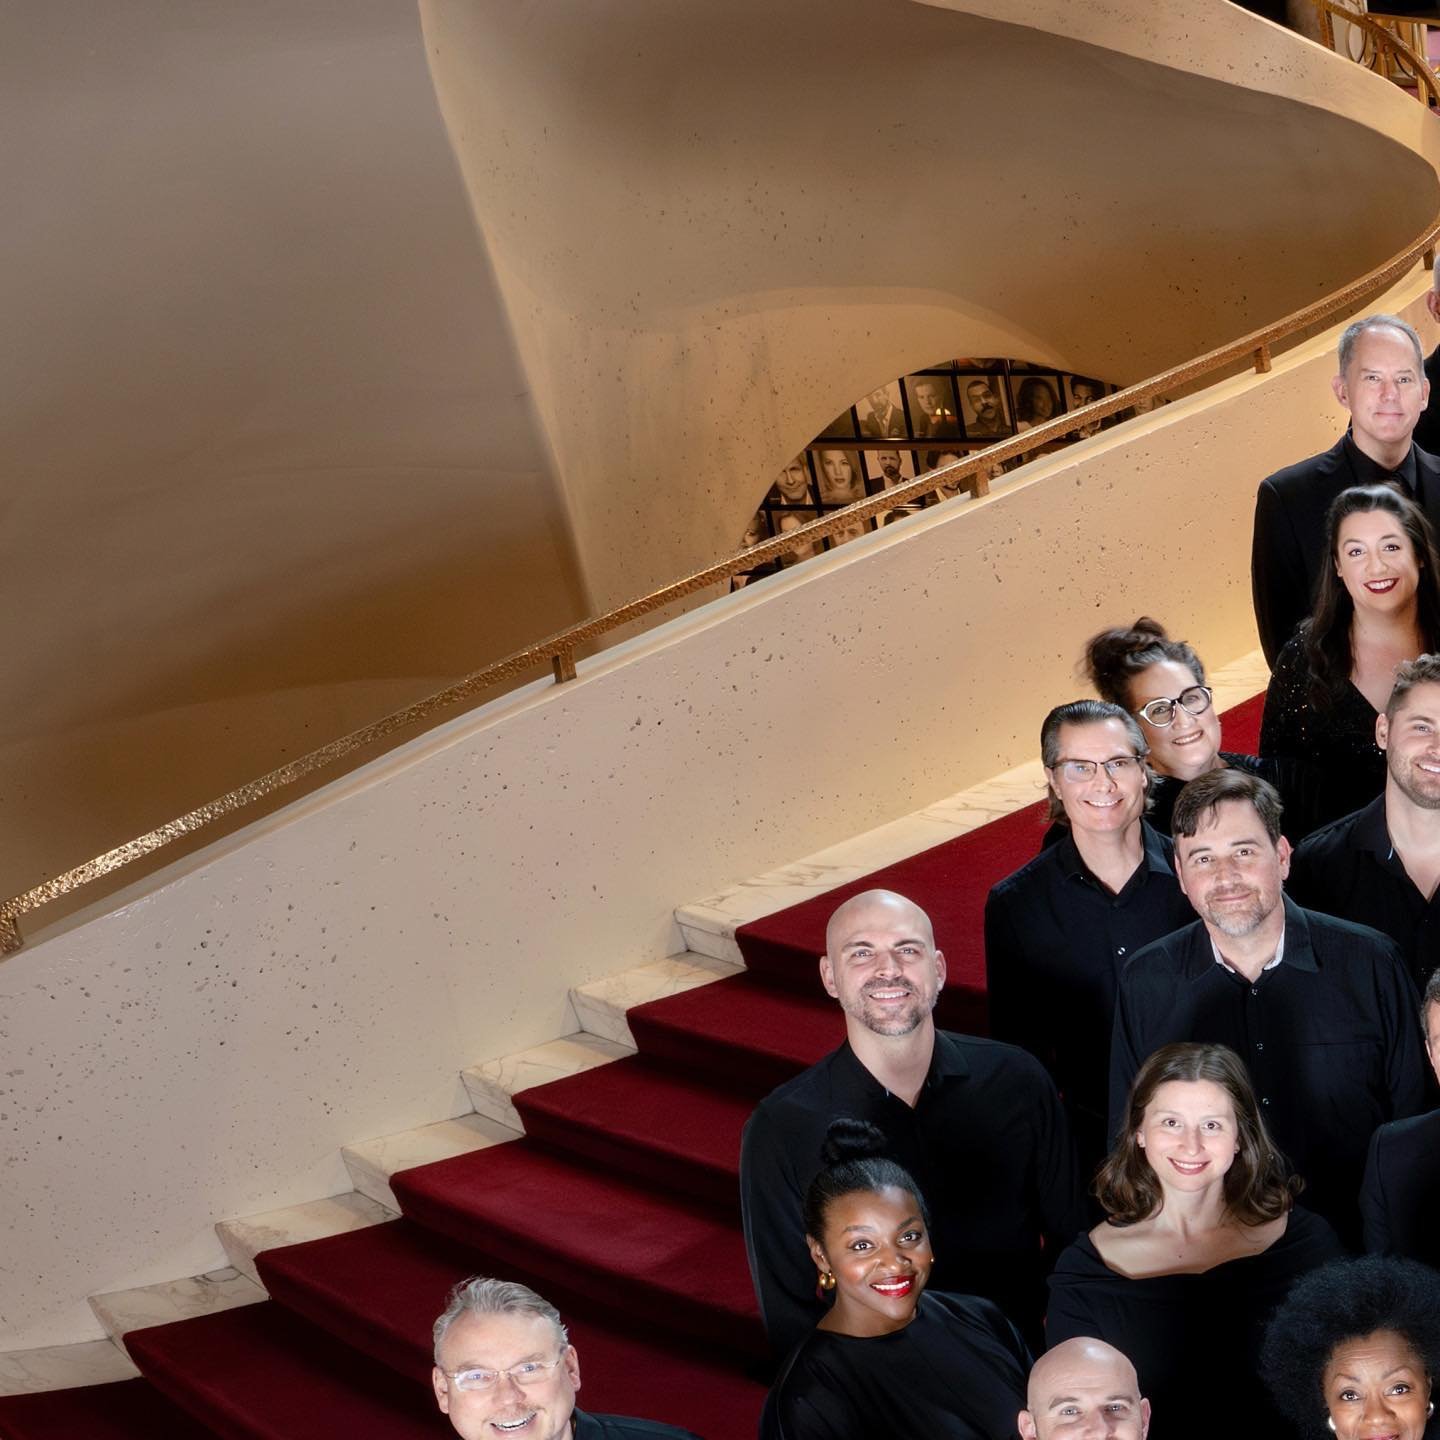 We unveil a new portrait today of the current full-time Met Opera Chorus with Maestro #DonaldPalumbo and @metopera Music Director Maestro @nezetseguin! You can see the entire shot by looking at our profile page. 📸 by @jennifertaylorphotography / Met